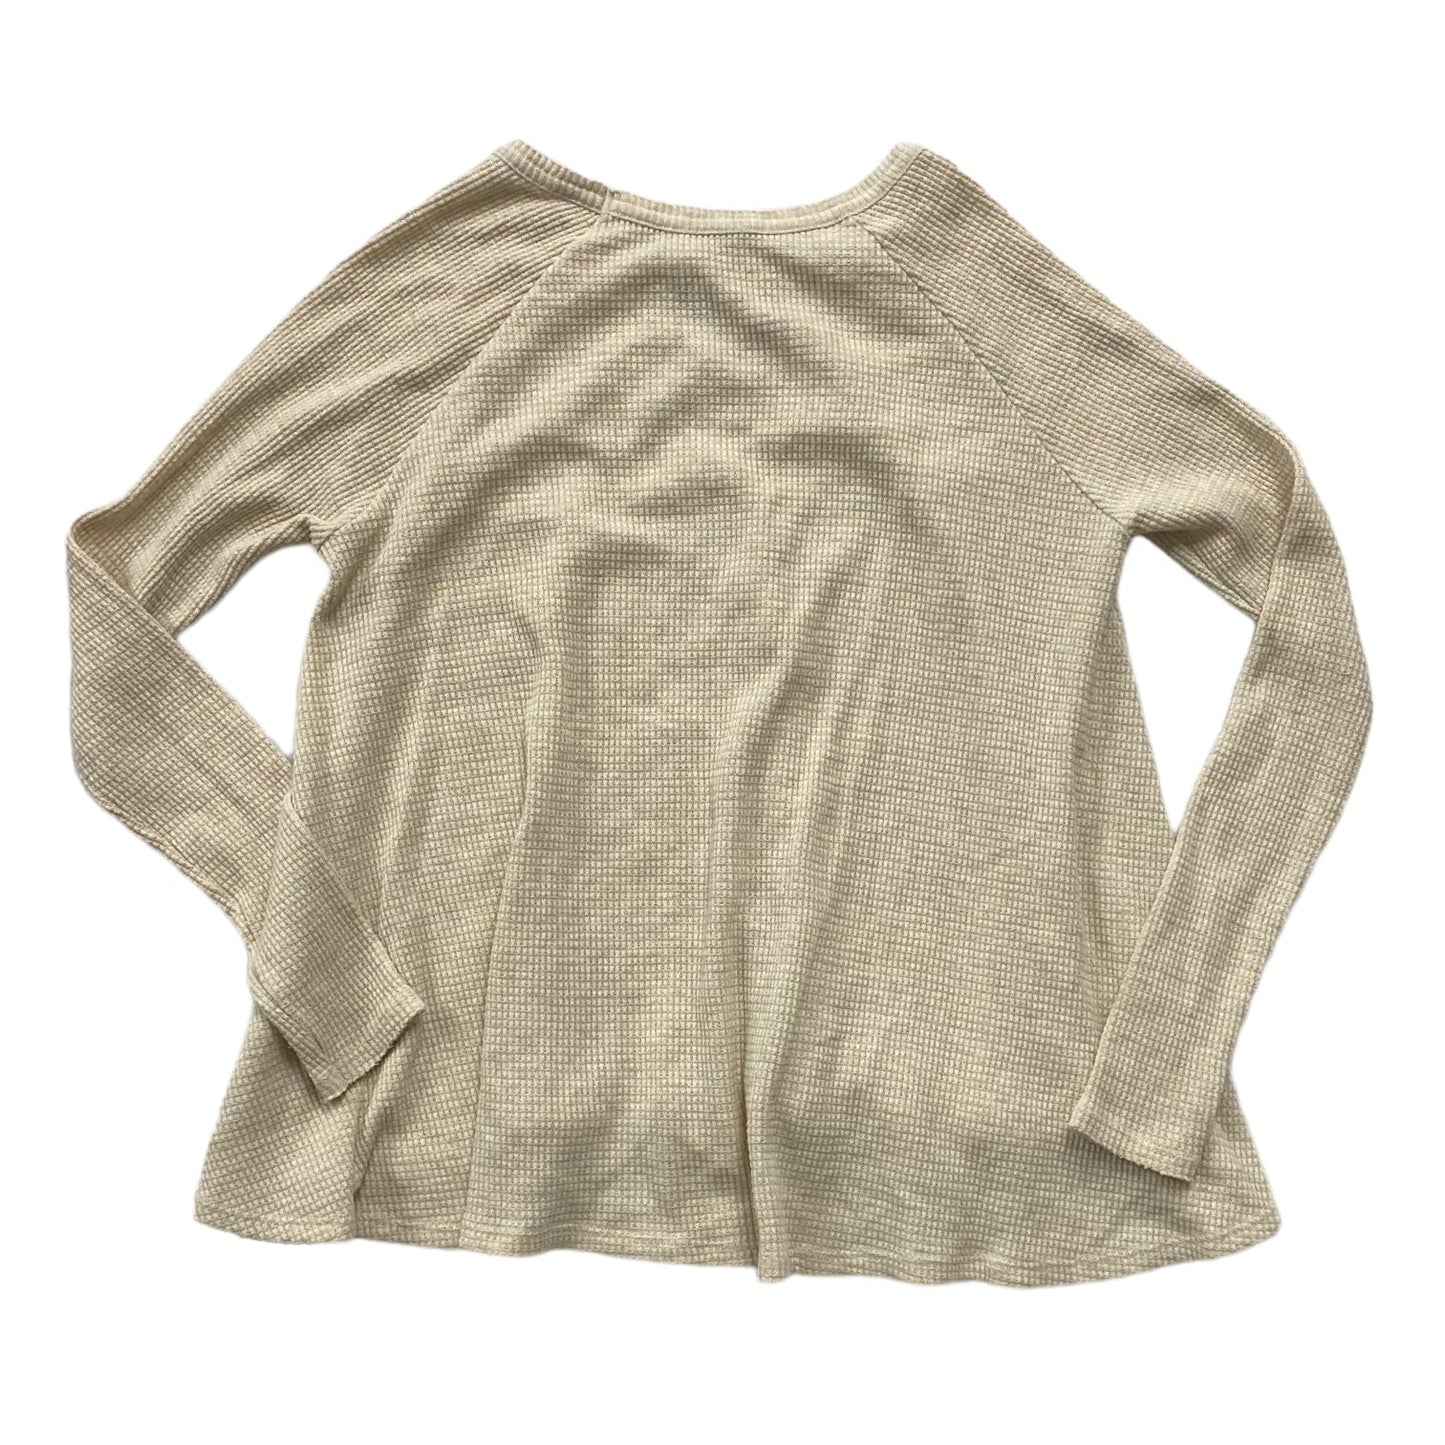 Tan Top Long Sleeve We The Free, Size S